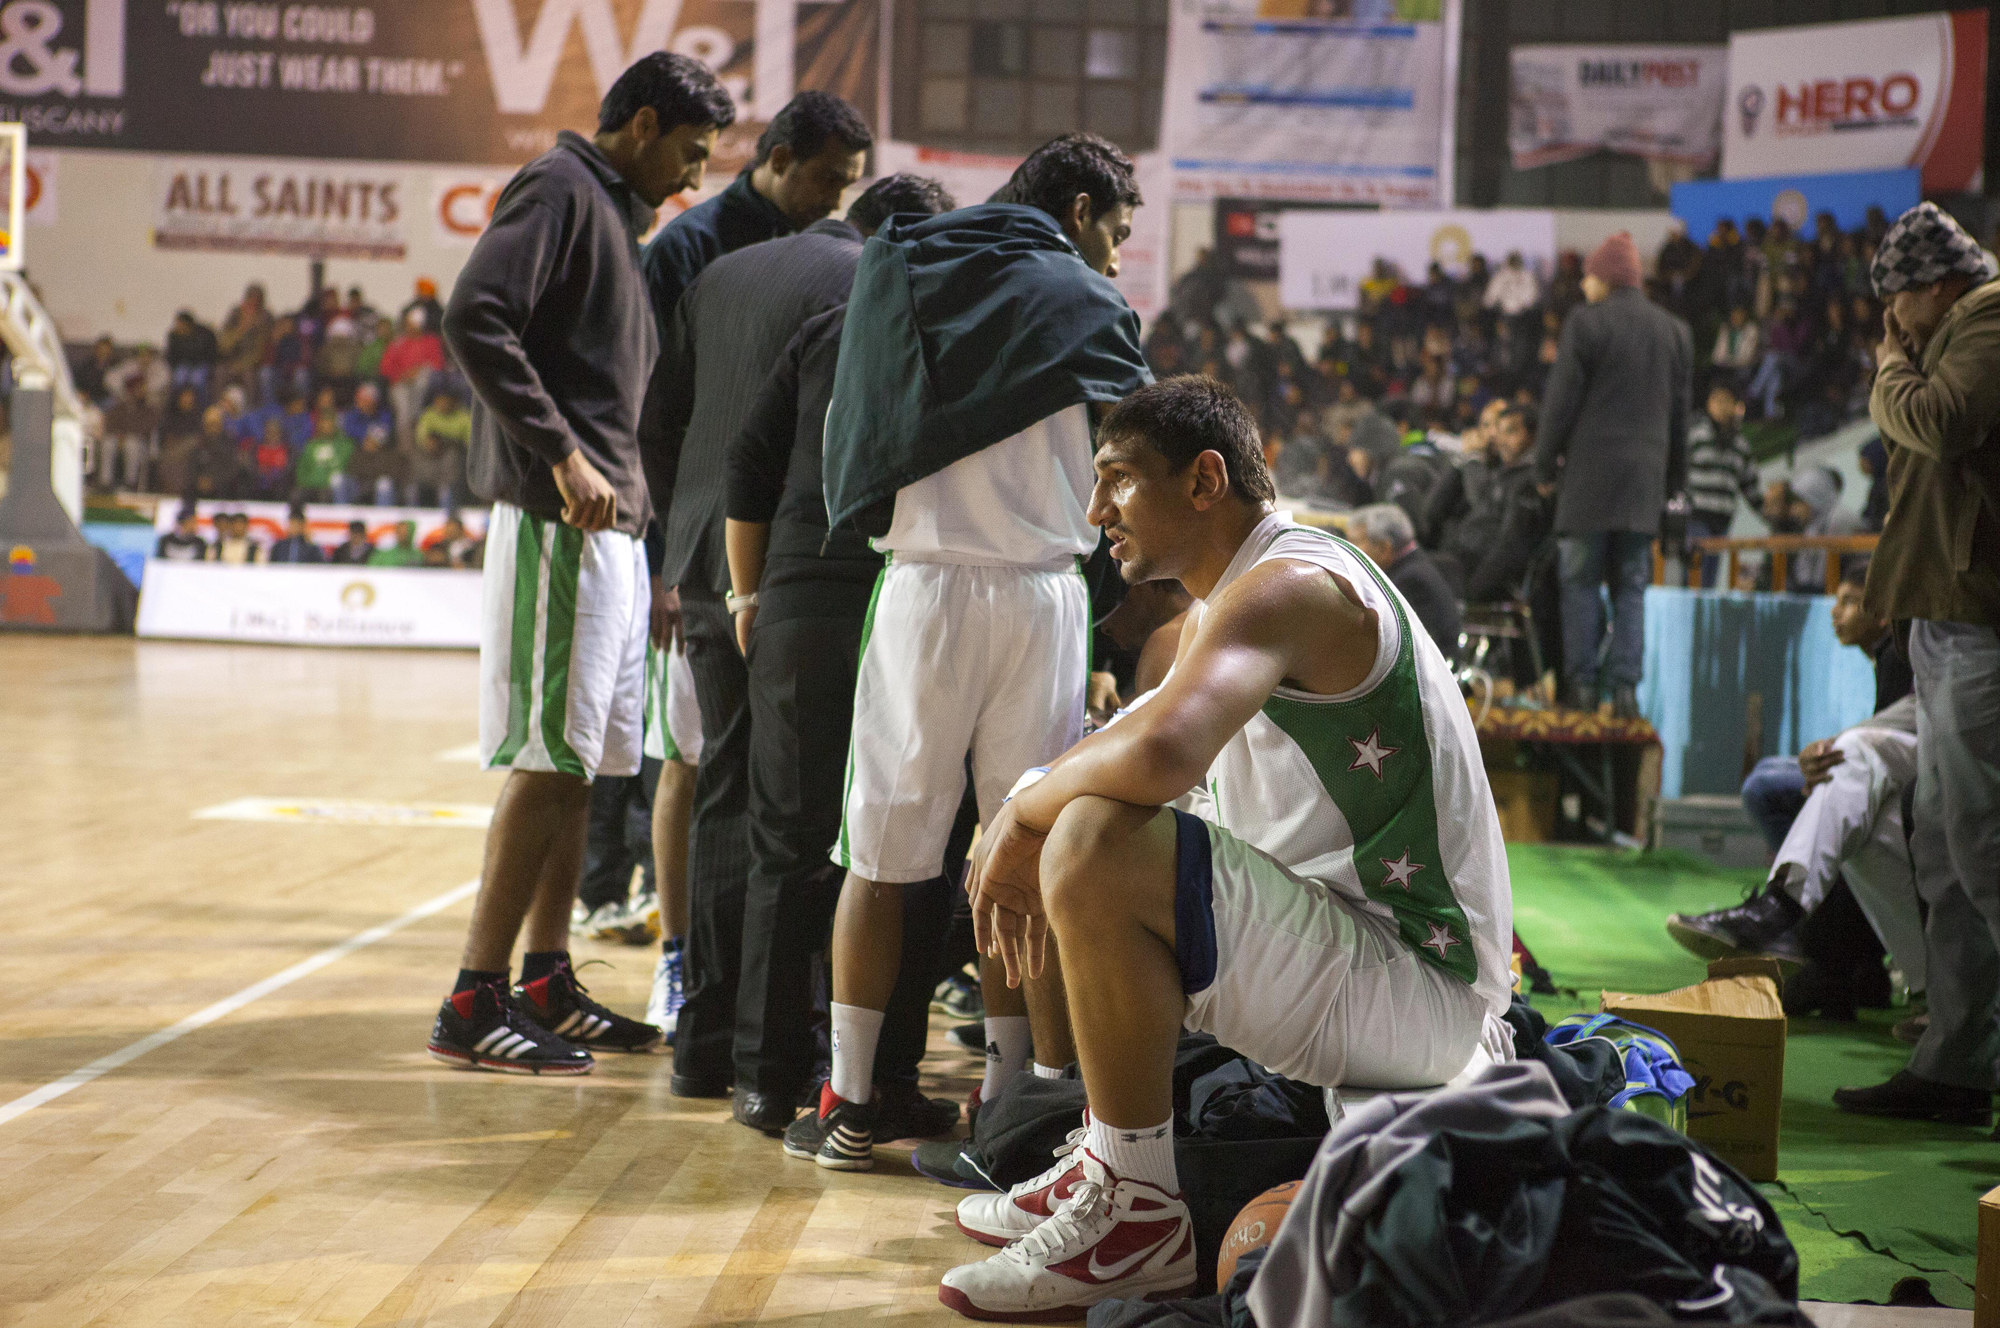 Satnam Singh Bhamara. Punjab team bench, 63rd Senior National Basketball Championship for Men and Women, Ludhiana, 2013. Satnam, India's 7ft 2in future hope for the NBA had come to play for the Punjab team from America where he was on scholarship at the IMG Academy in Florida.